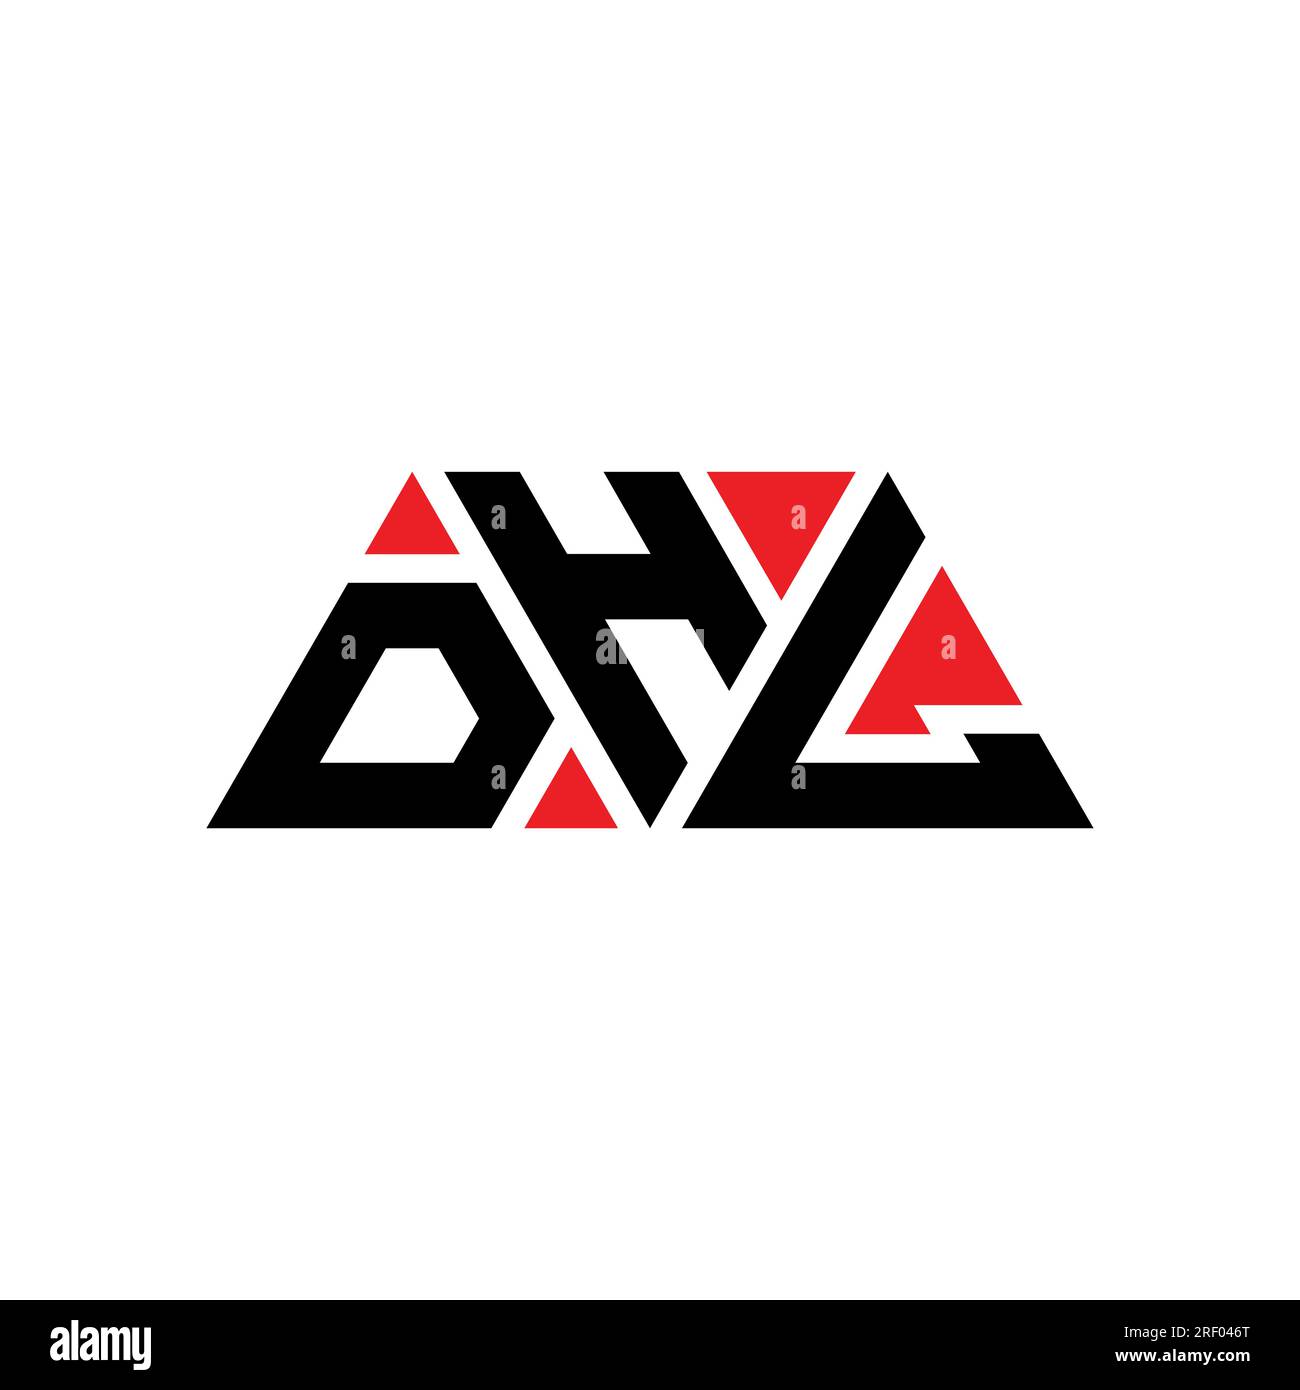 DHL triangle letter logo design with triangle shape. DHL triangle logo design monogram. DHL triangle vector logo template with red color. DHL triangul Stock Vector